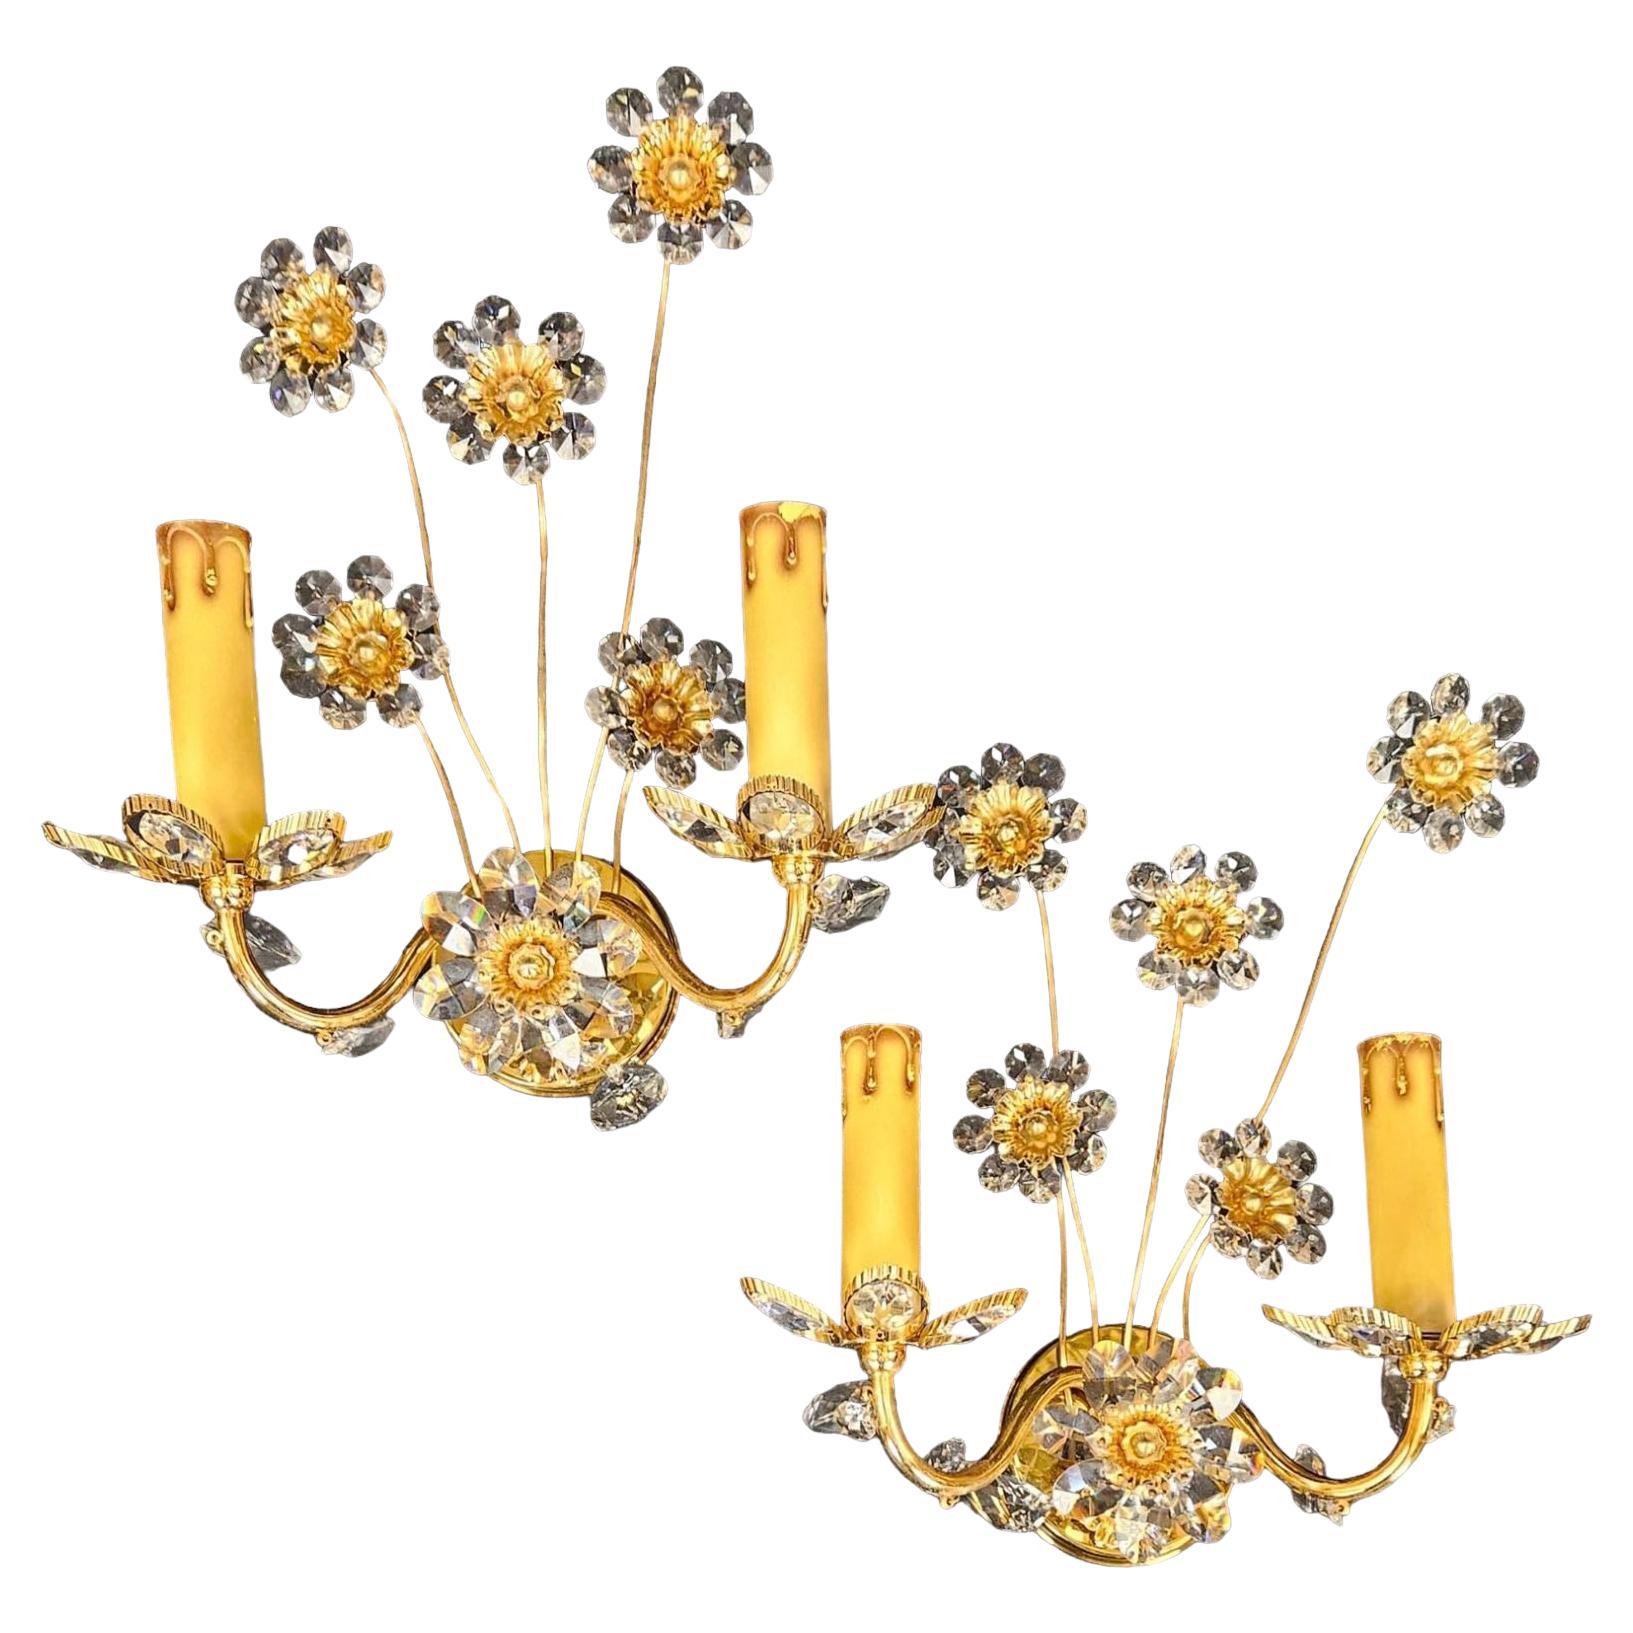 Stunning Pair of Vintage Gold-Plated "Palwa" Crystal Flower 2 Light Sconces For Sale